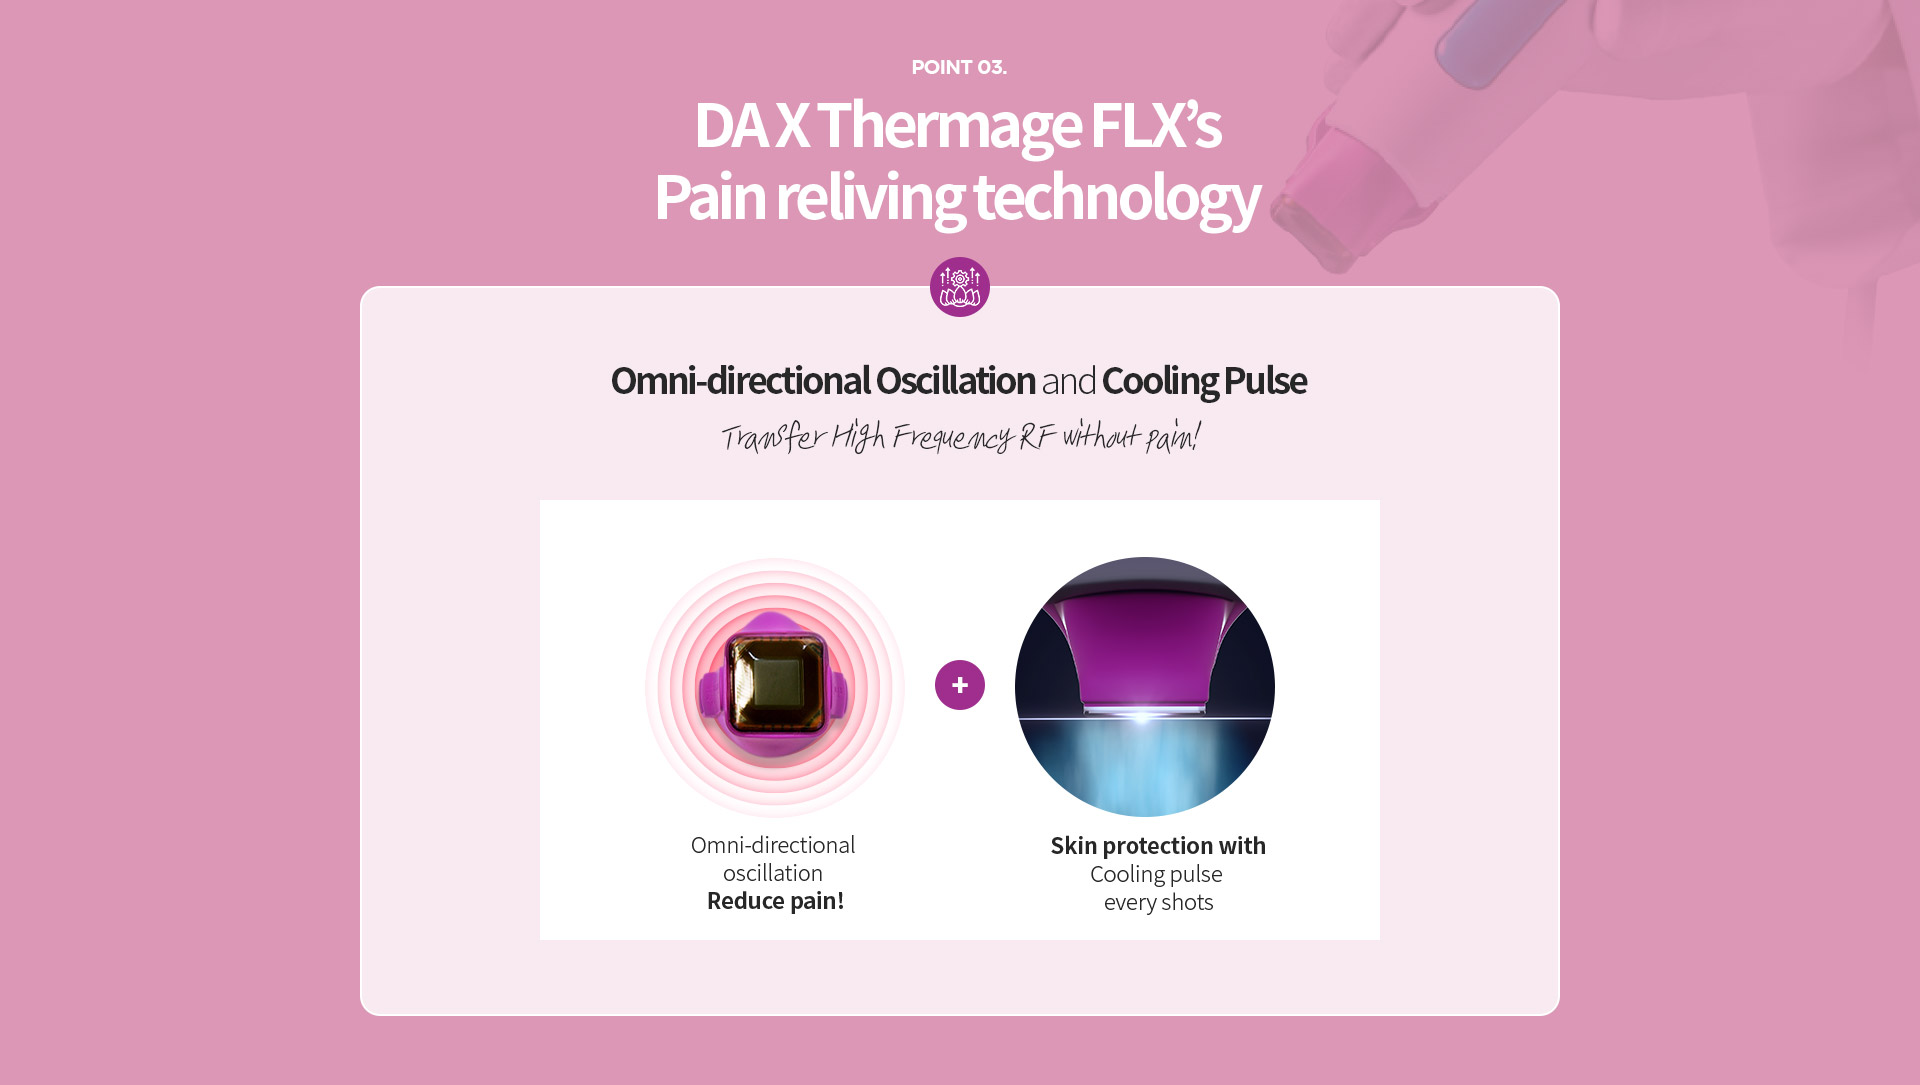 DA Thermage FLX, point03. DA X Thermage FLX’s Pain reliving technology